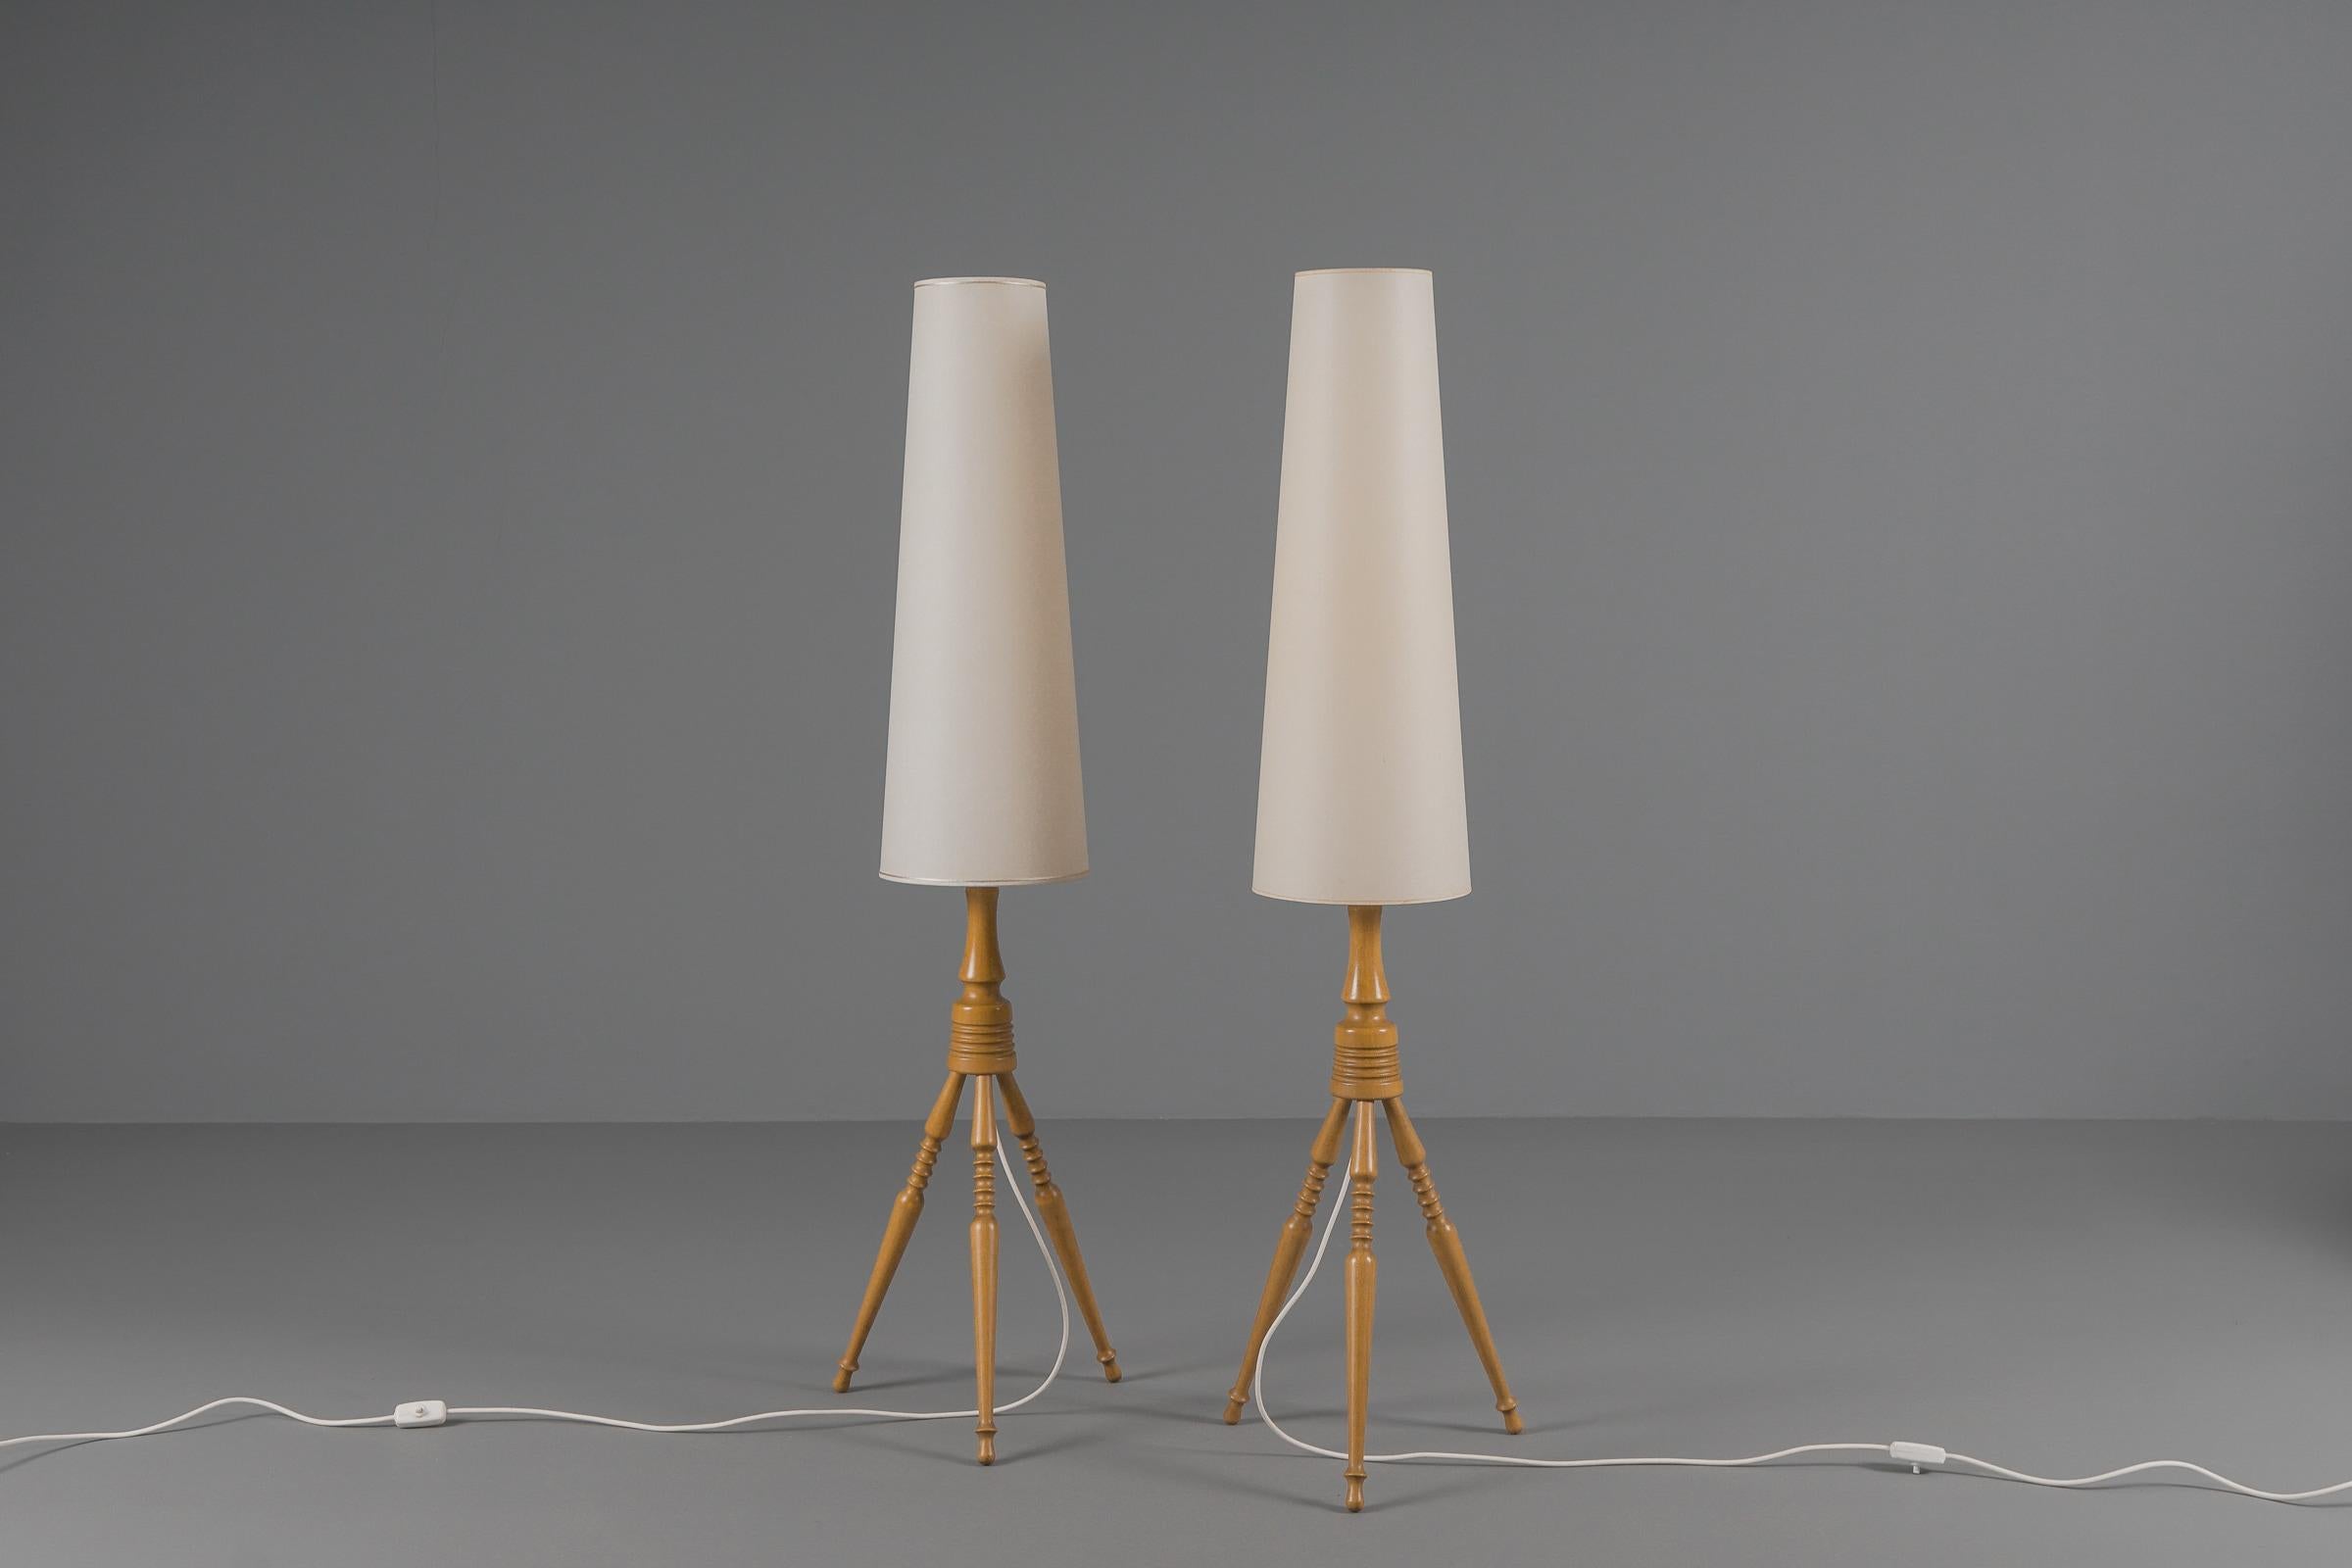 Lovely Pair Mid-Century Modern Floor Lamps in Wood, 1960s, France For Sale 5